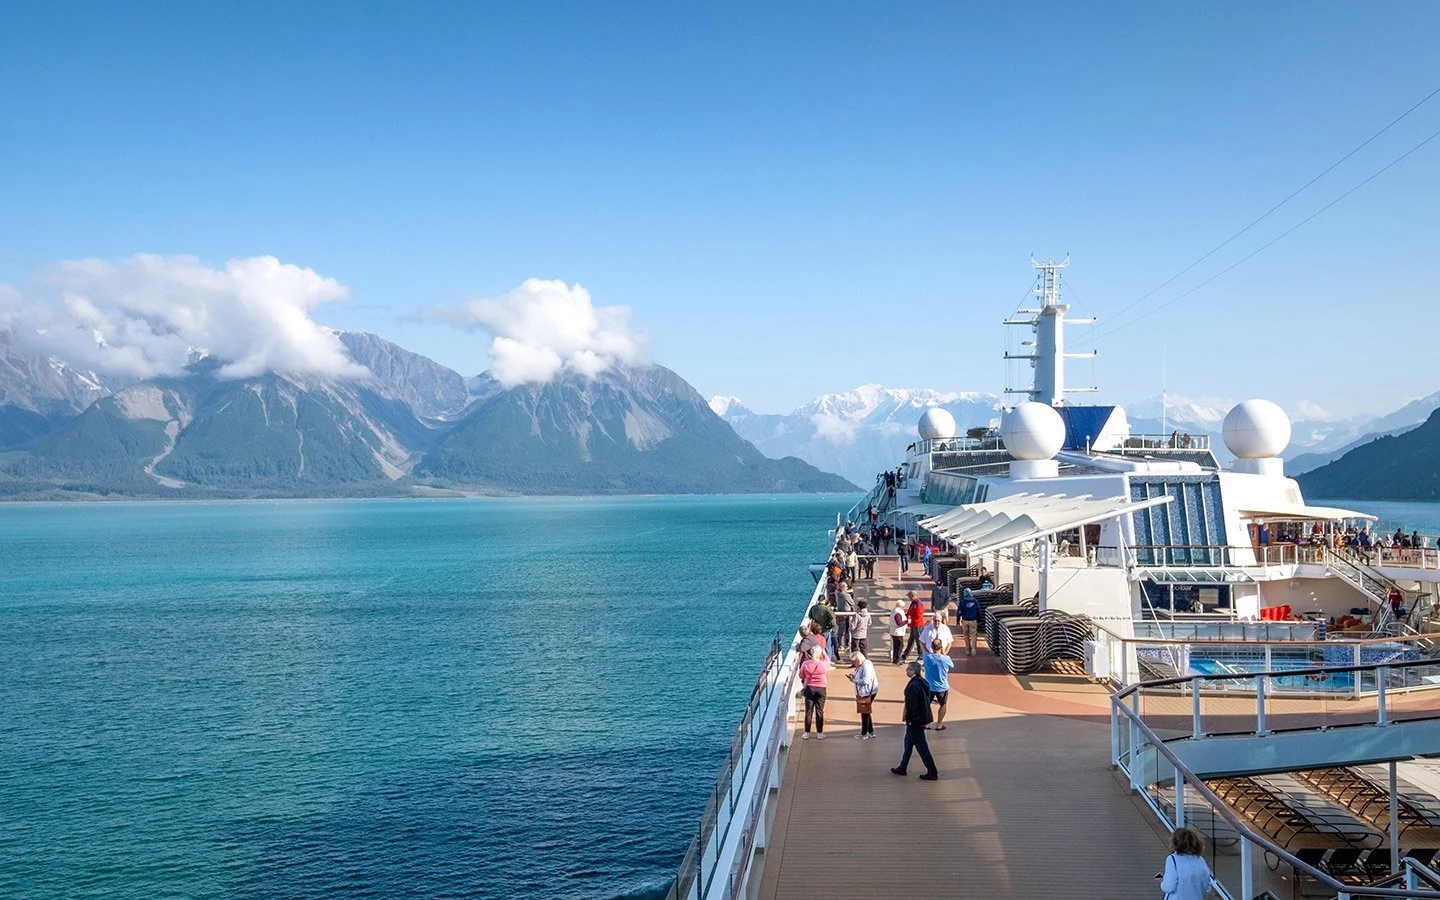 How to choose an Alaskan cruise – sunny weather in summer